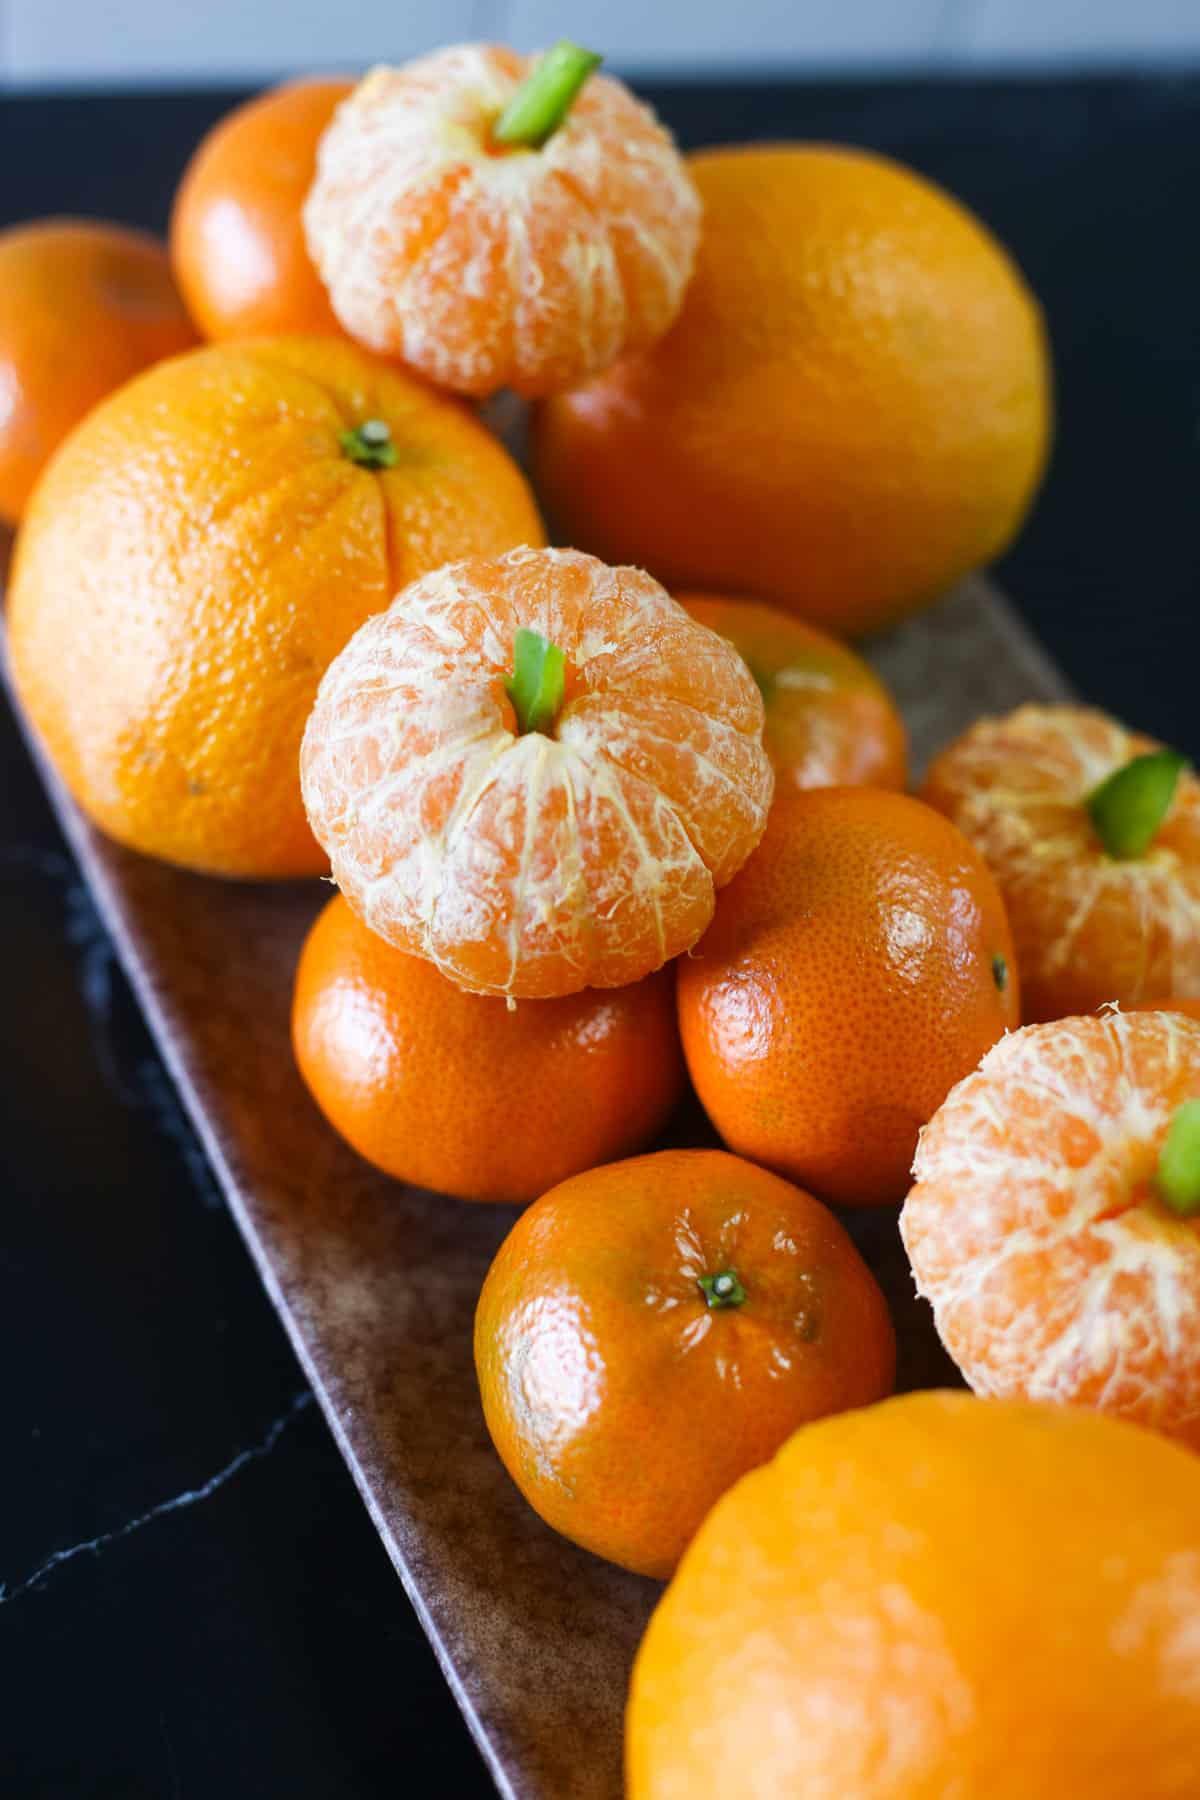 A platter of oranges, clementines, and clementine pumpkins.